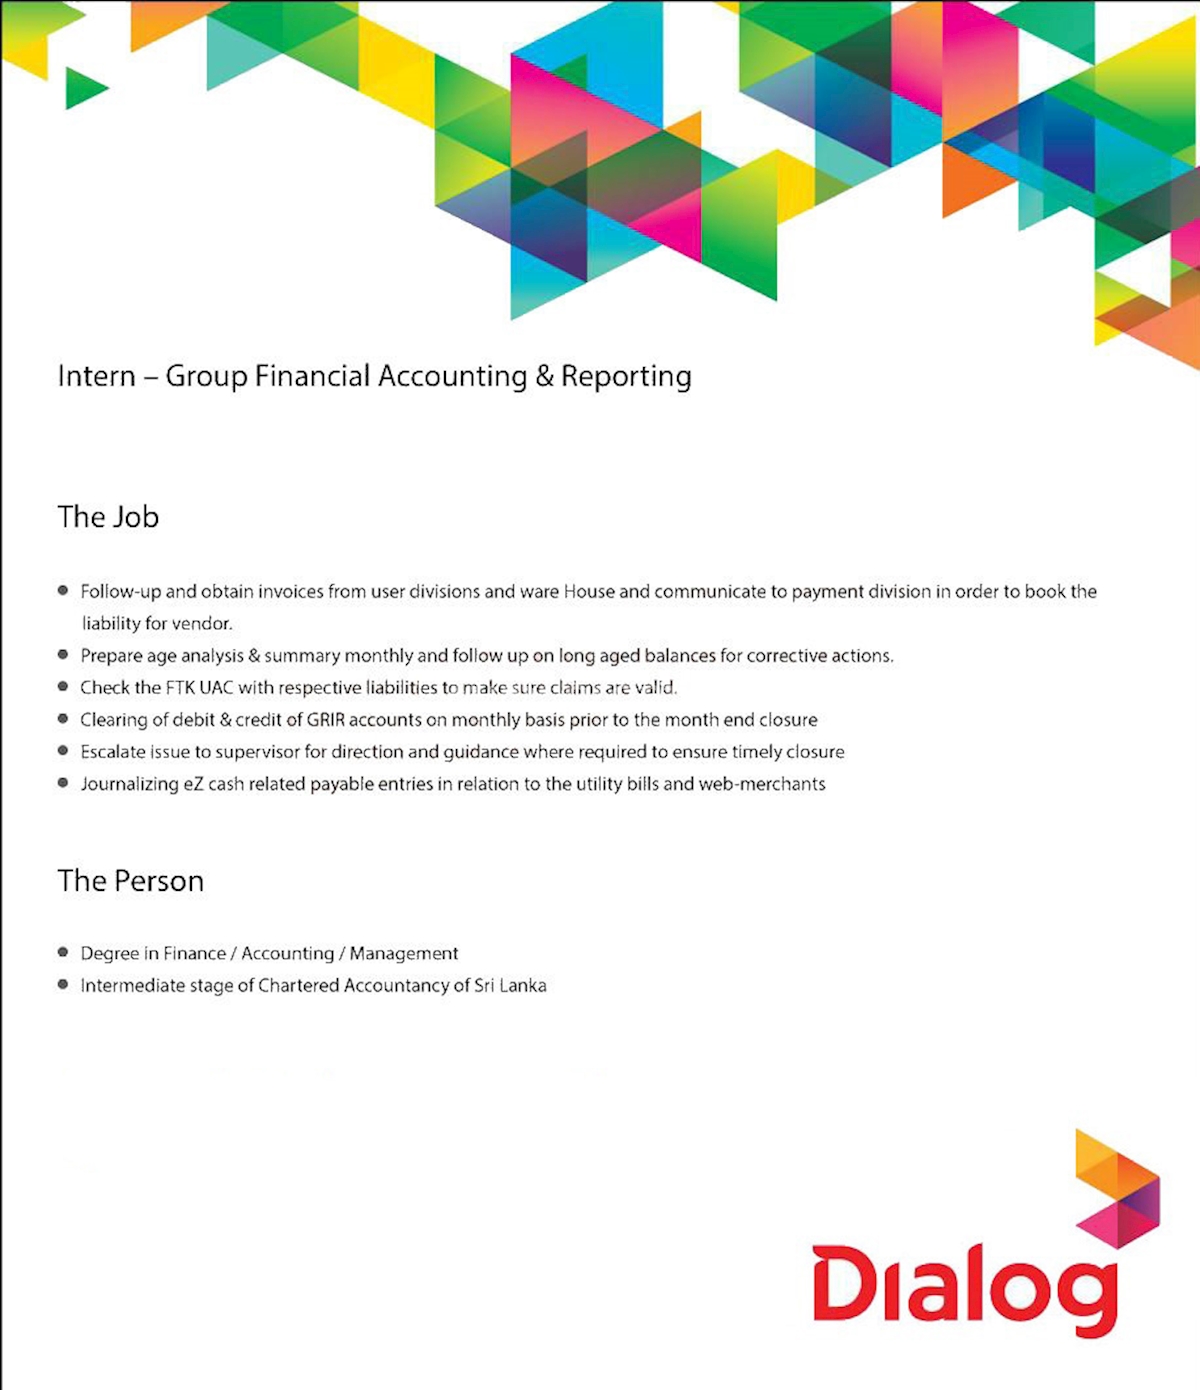 Intern - Group Financial Accounting & Reporting 